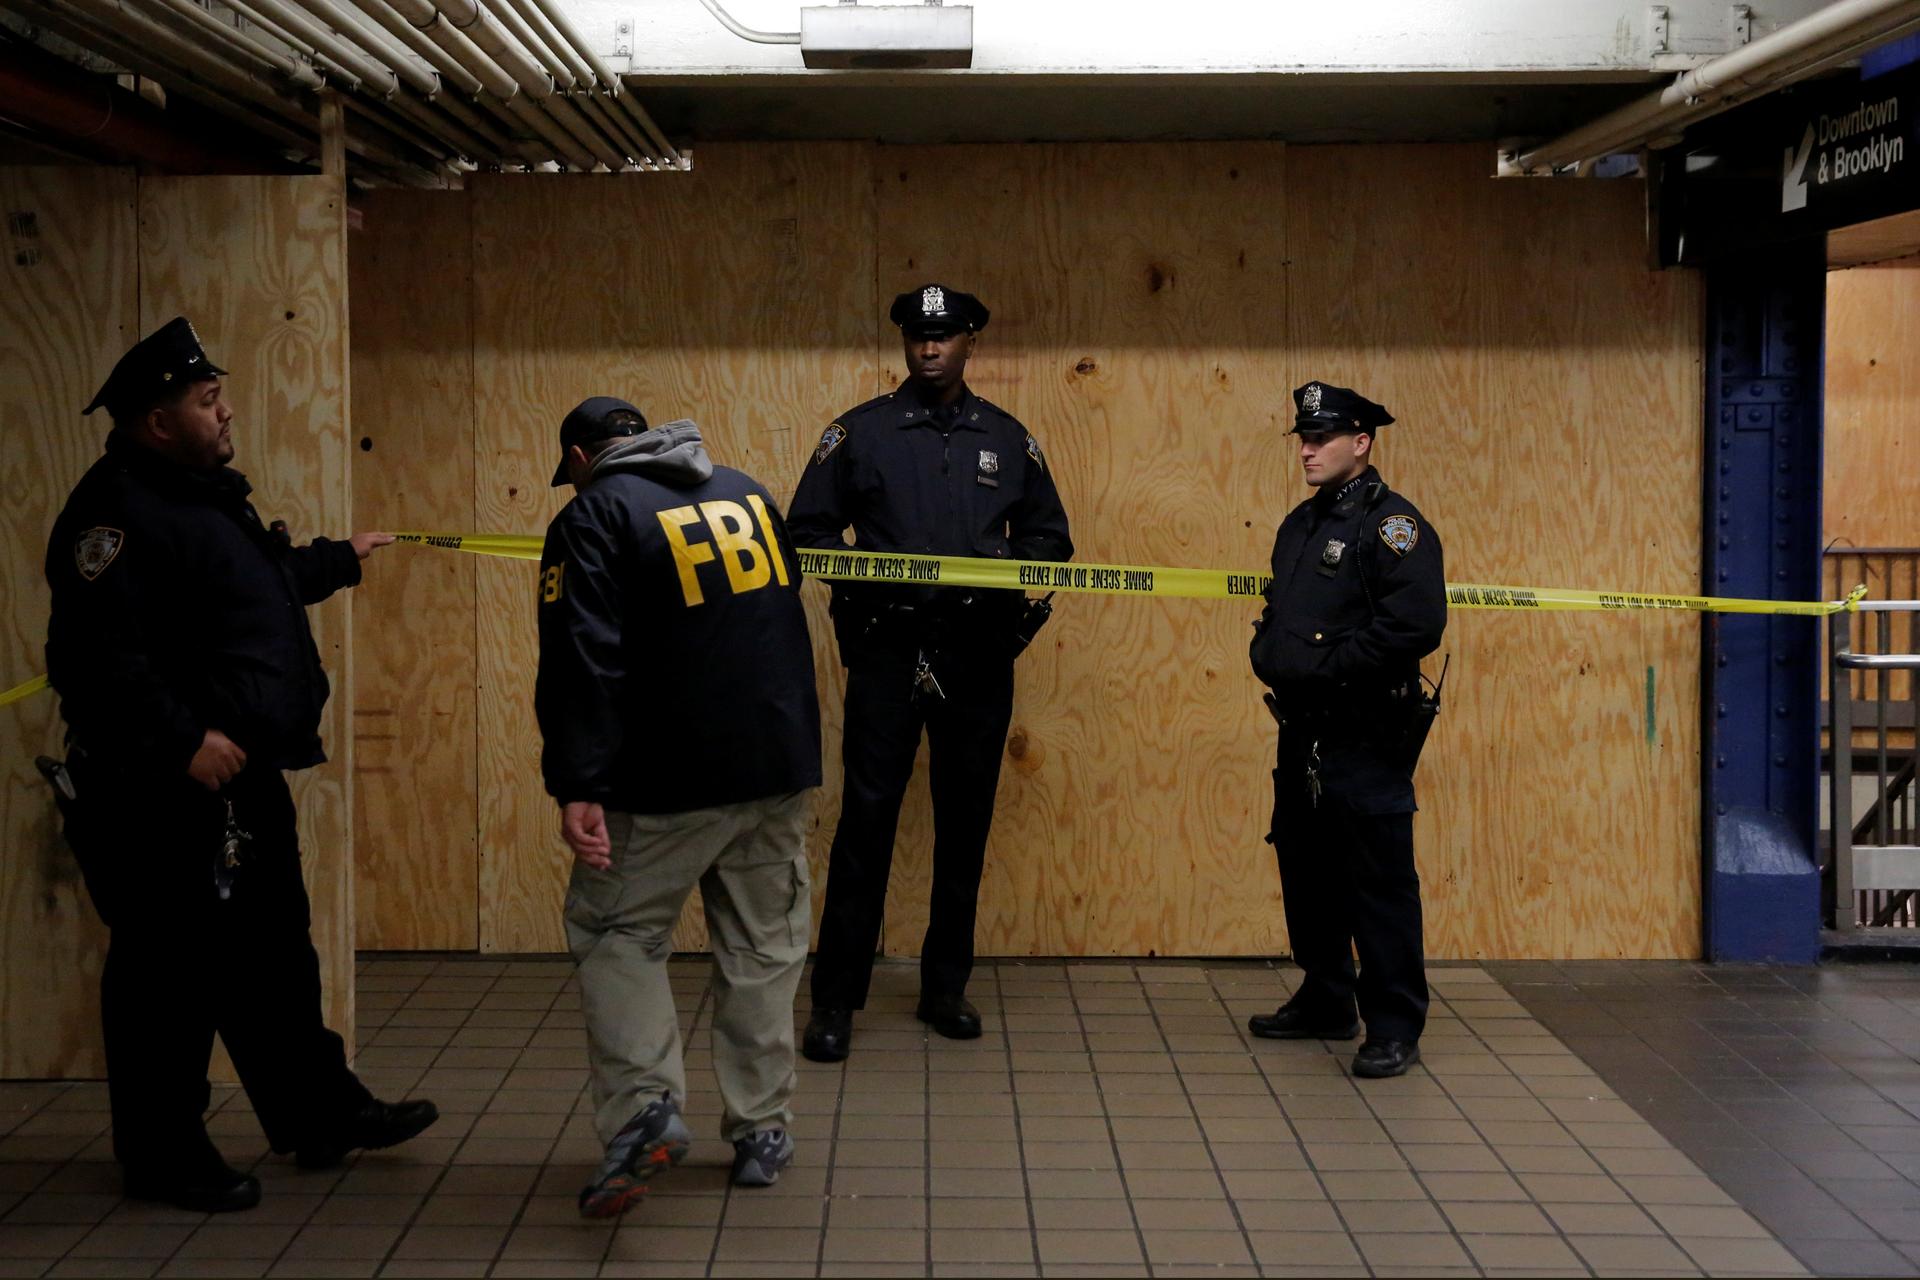 A member of the FBI enters the crime scene beneath the New York Port Authority Bus Terminal following an attempted bombing during the morning rush hour.